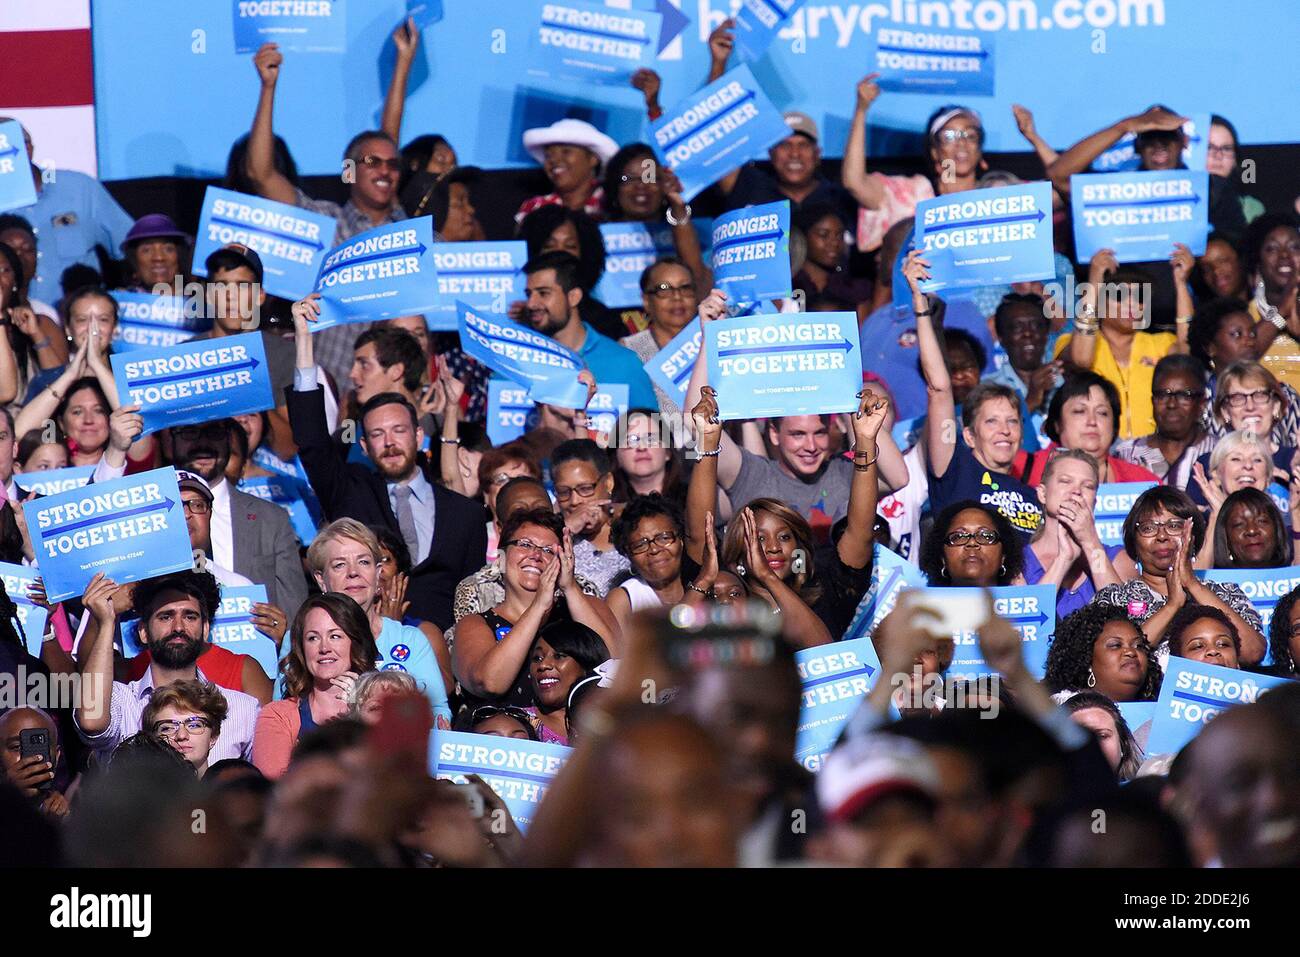 NO FILM, NO VIDEO, NO TV, NO DOCUMENTARY - An enthusiastic crowd greets President Obama and Hillary Clinton at the Charlotte Convention Center as Obama makes his first campaign appearance with Clinton, the presumptive Democratic presidential nominee on Tuesday, July 5, 2016, in Charlotte, NC, USA. Photo by John D. Simmons/Charlotte Observer/TNS/ABACAPRESS.COM Stock Photo